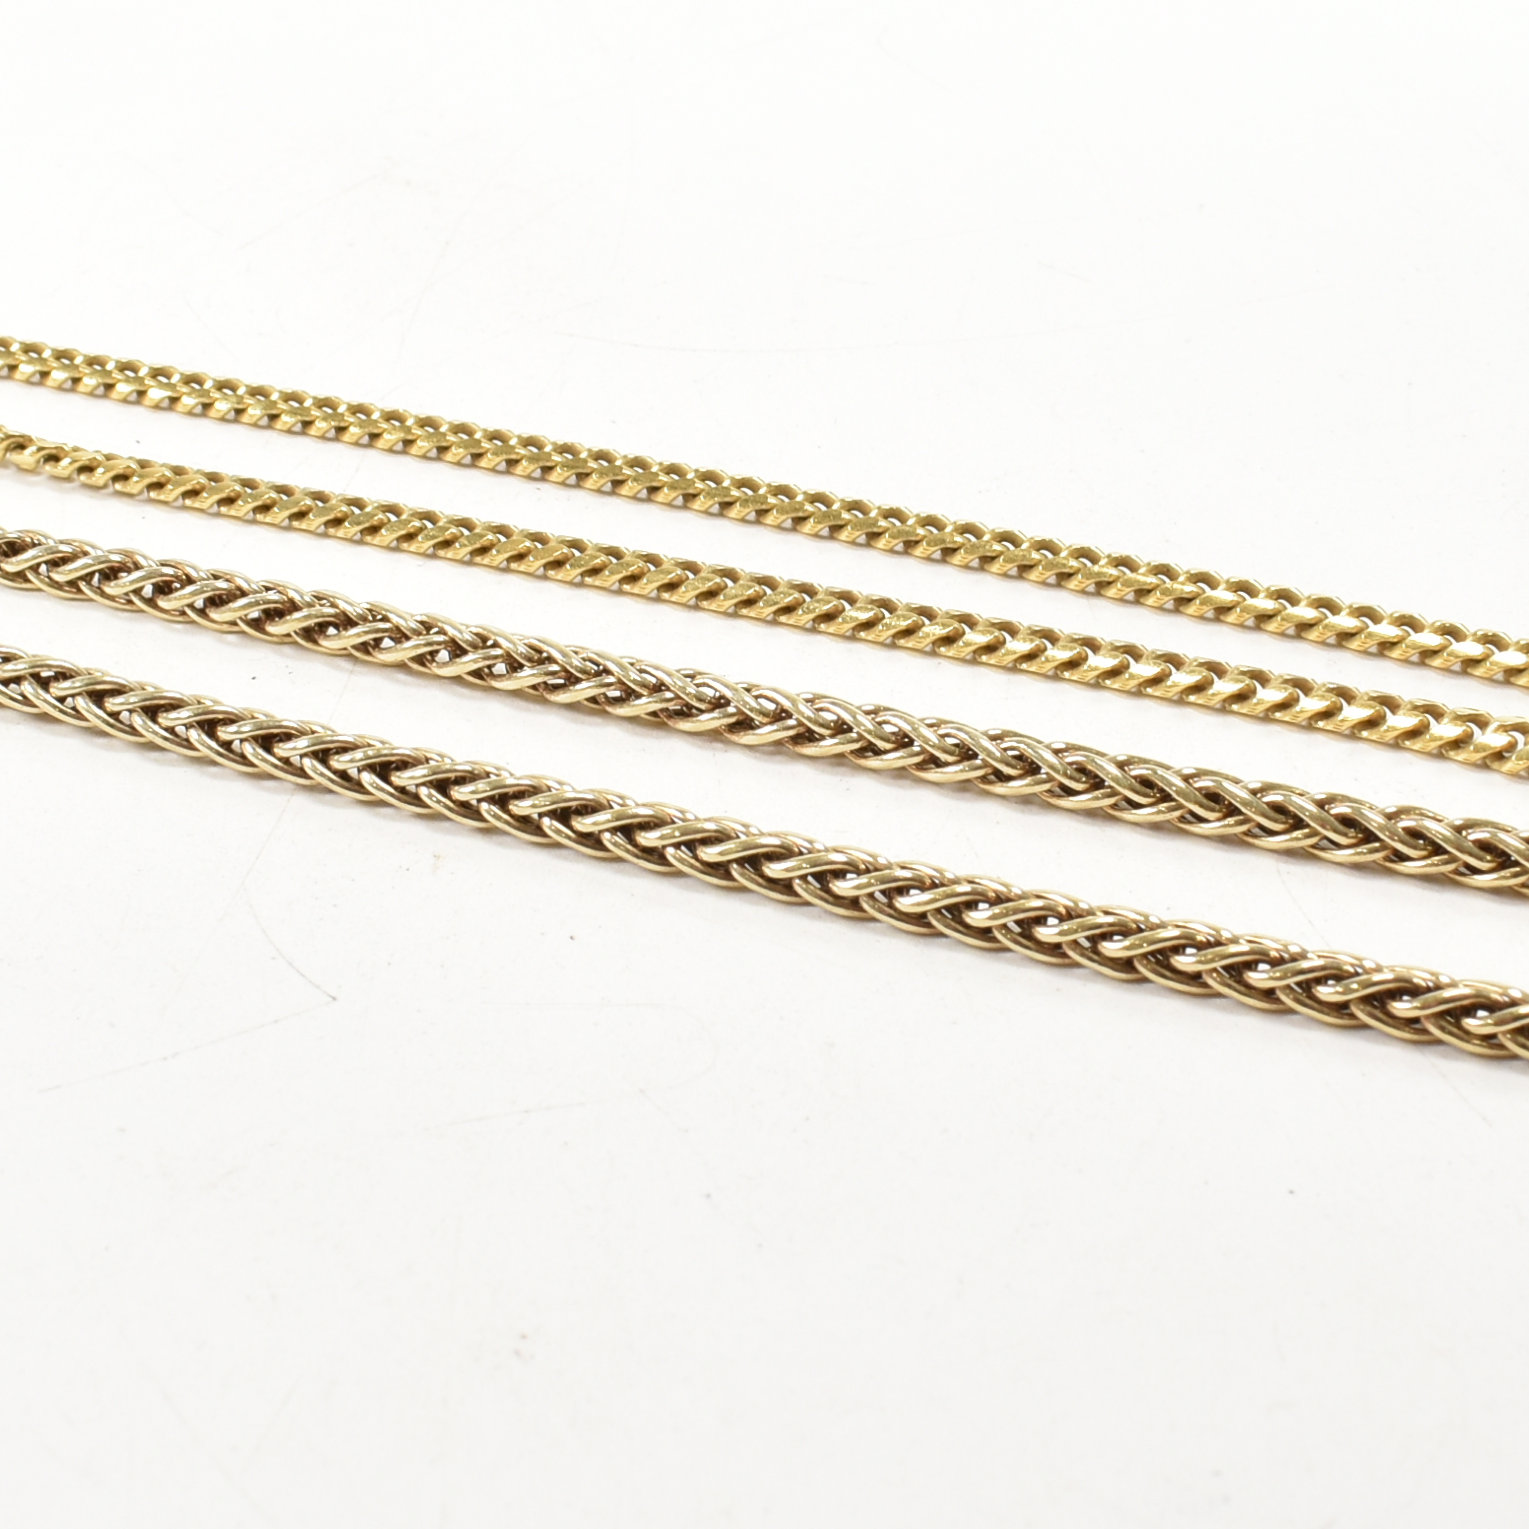 TWO ITALIAN GOLD ON 925 SILVER CHAIN NECKLACES - Image 2 of 4